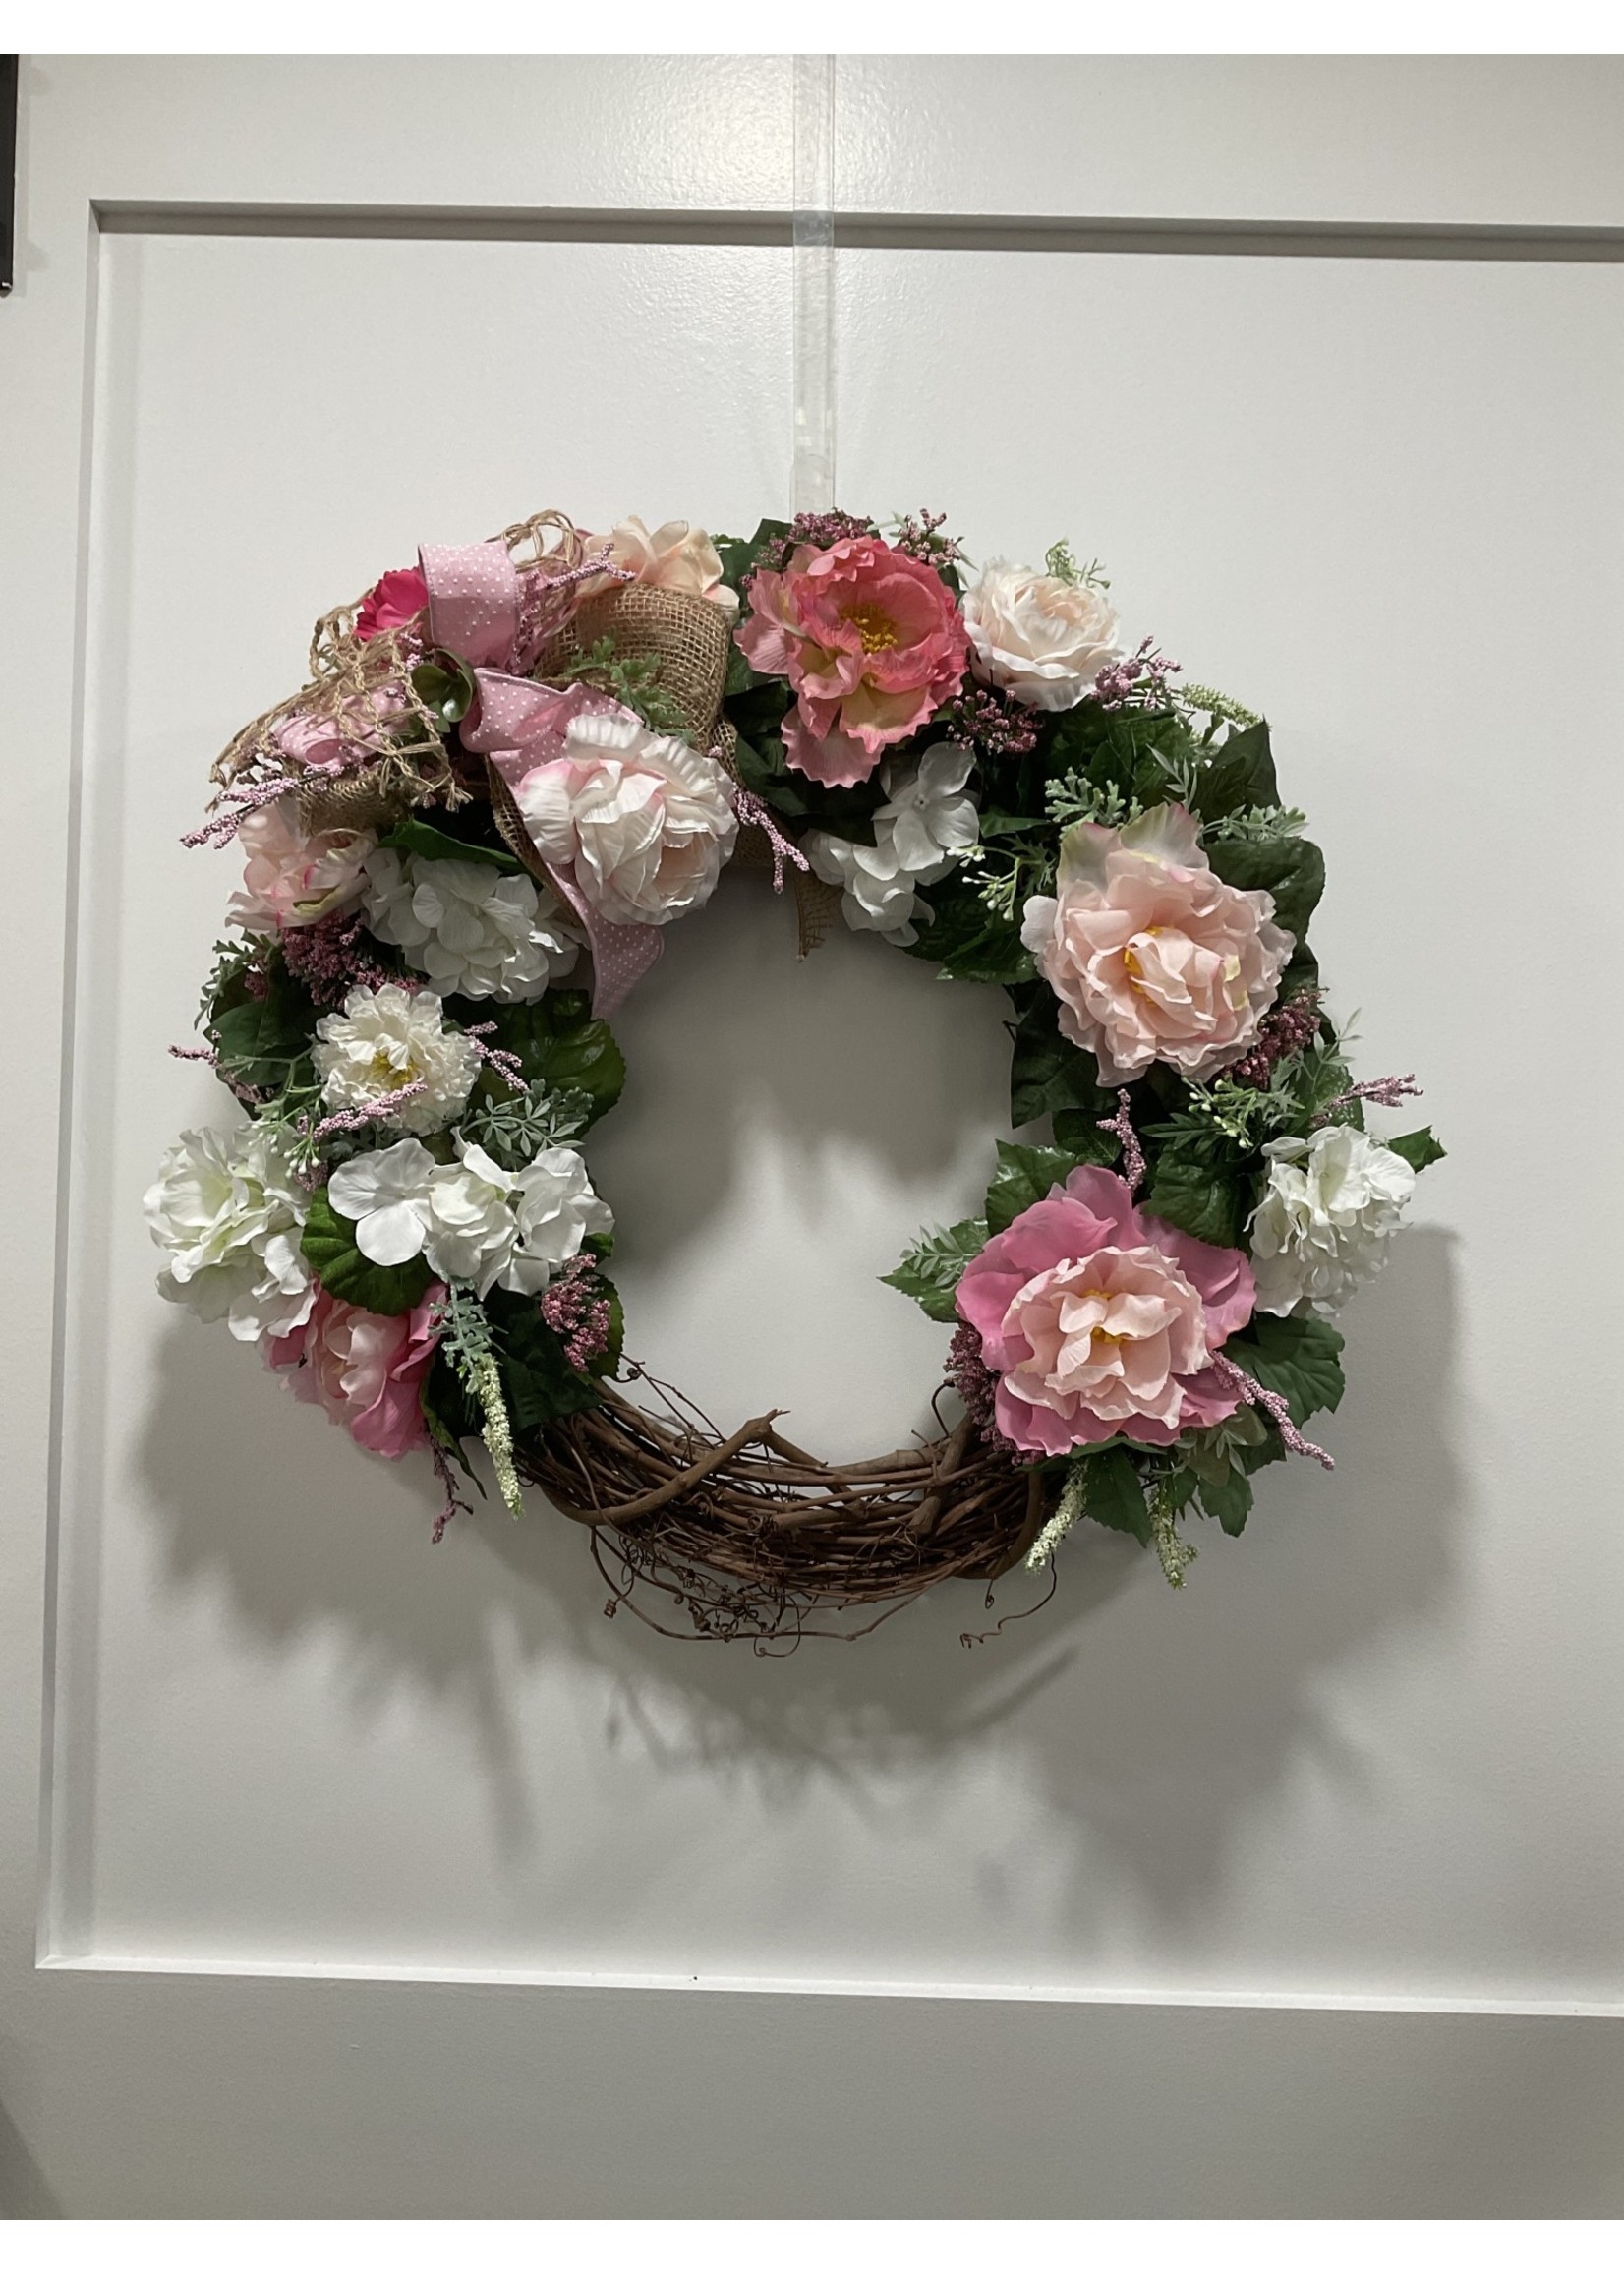 My New Favorite Thing Wreath Grapevine 22 in-Pink and White Flowers w/Pink Polka Dot Ribbon/Burlap